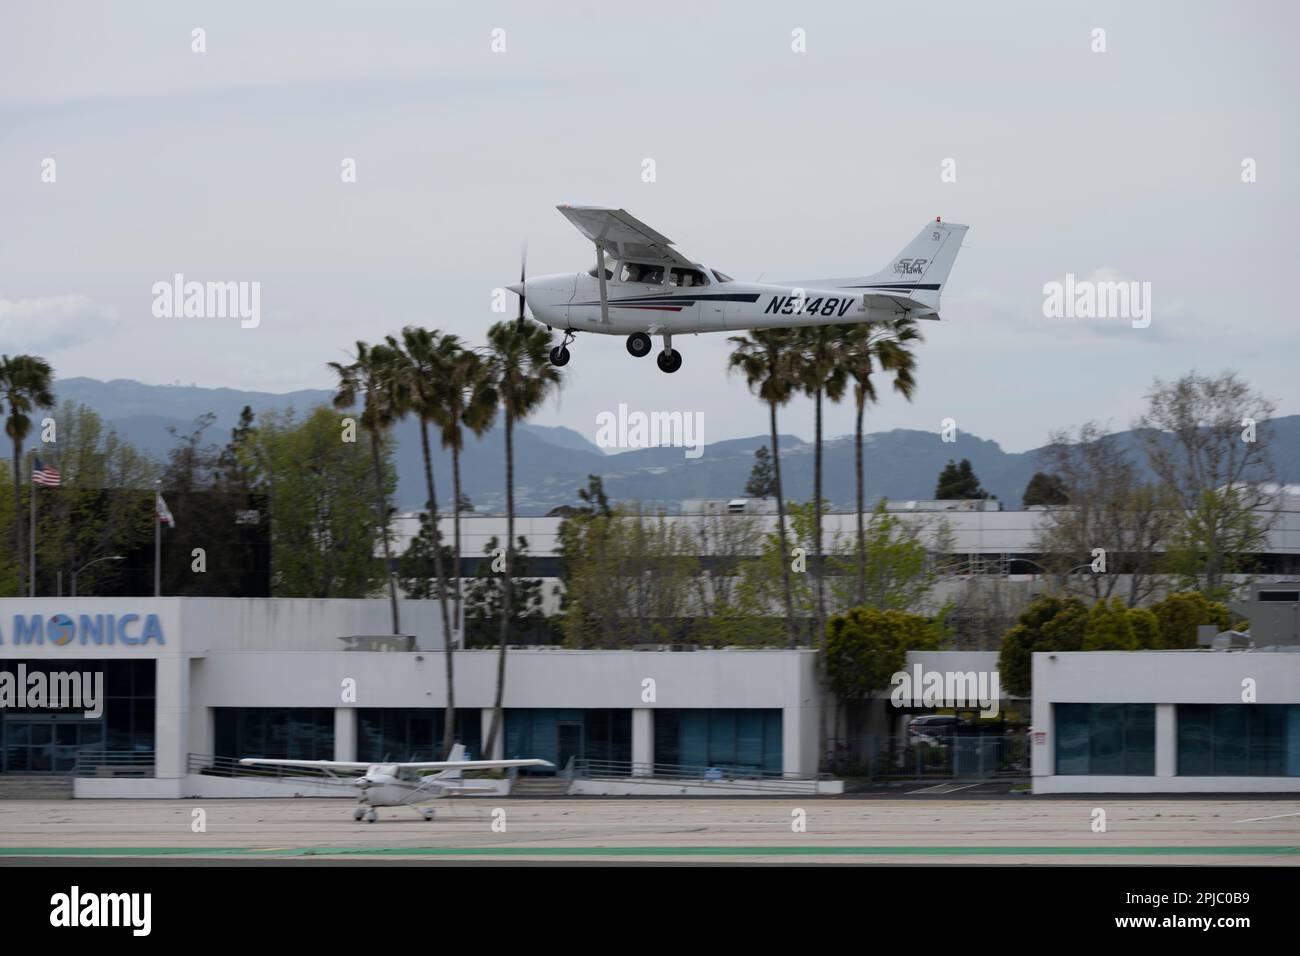 Santa Monica, California, USA. 31st Mar, 2023. A Cessna 172 (N5148V) single engine airplane doing a go-around after aborting a landing approach on Runway 21.Santa Monica Airport (ICAO: KSMO) is a general aviation airport serving FBOs, flight schools and hobbyists. Its location near residential areas and it's short runway have caused controversy and led to efforts to close the airport. The FAA announced the airport will close in 2028 to be converted into a public park. The airport has a rich history, having been used for aviation purposes since 1917 where it was home to the Douglas Stock Photo